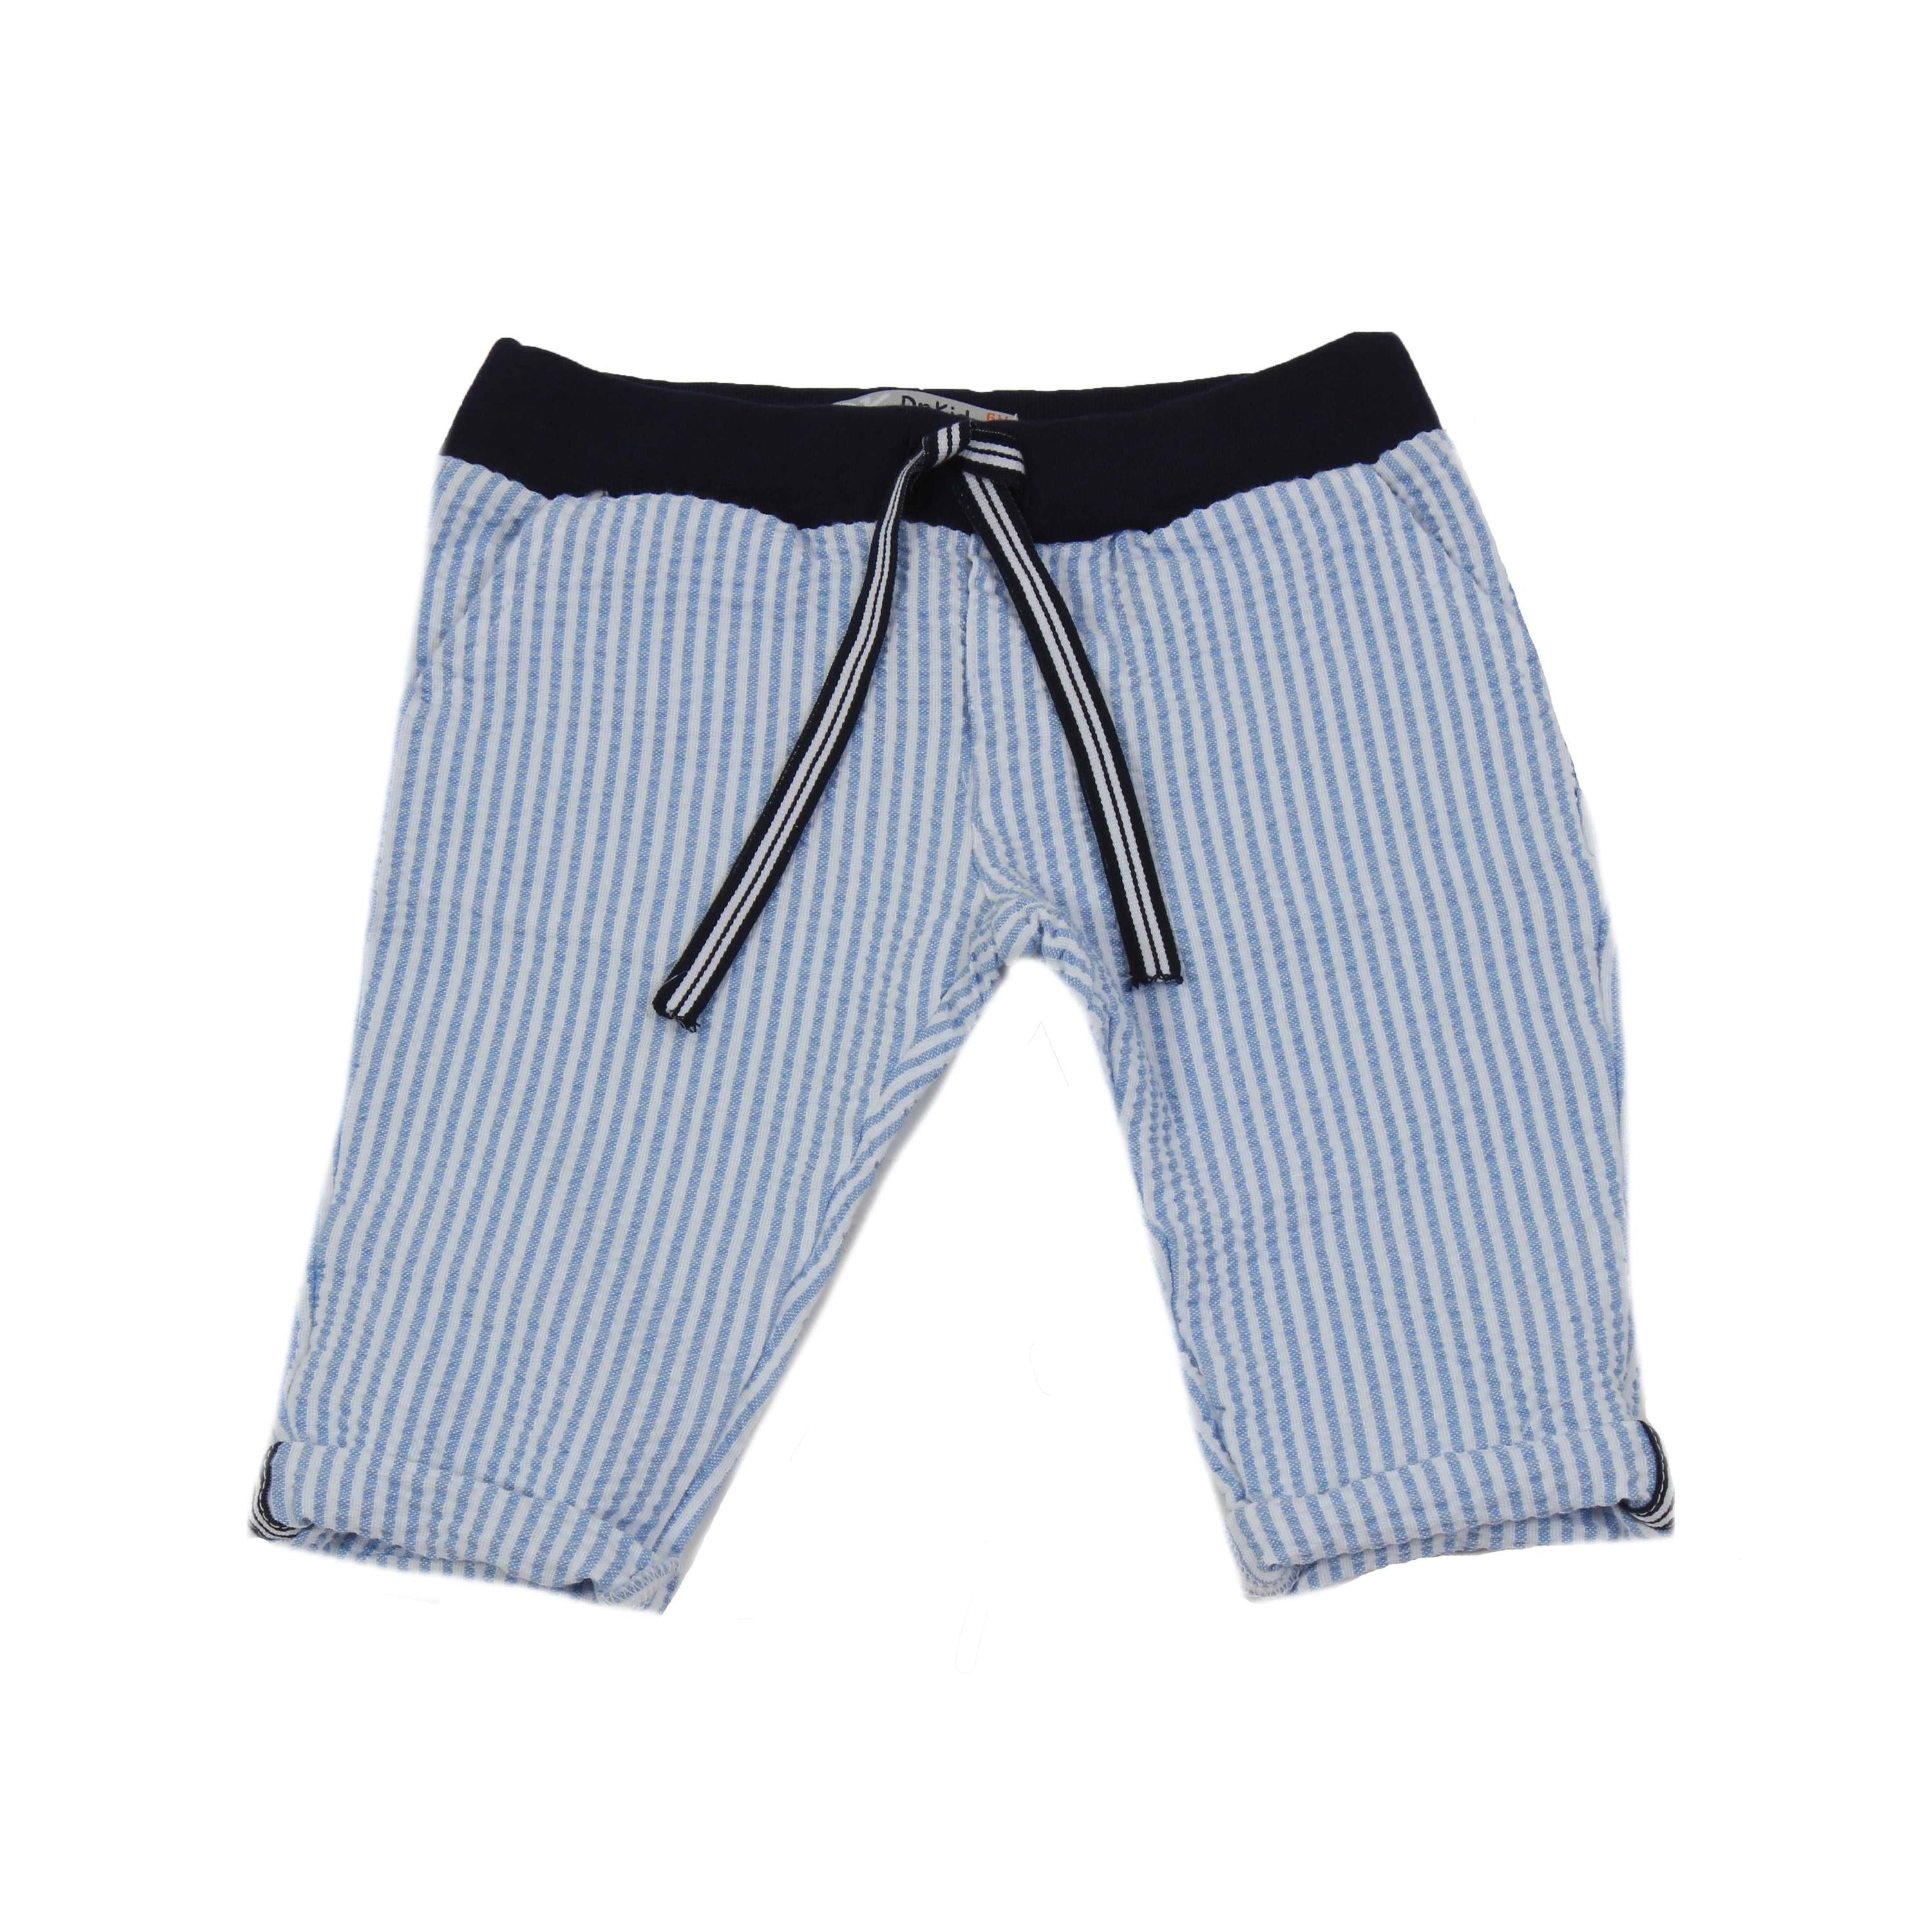 Pantalone Lungo in Cotone a Righe Celeste-Bianco Bambino DR KID DK523 - DR.KID - LuxuryKids